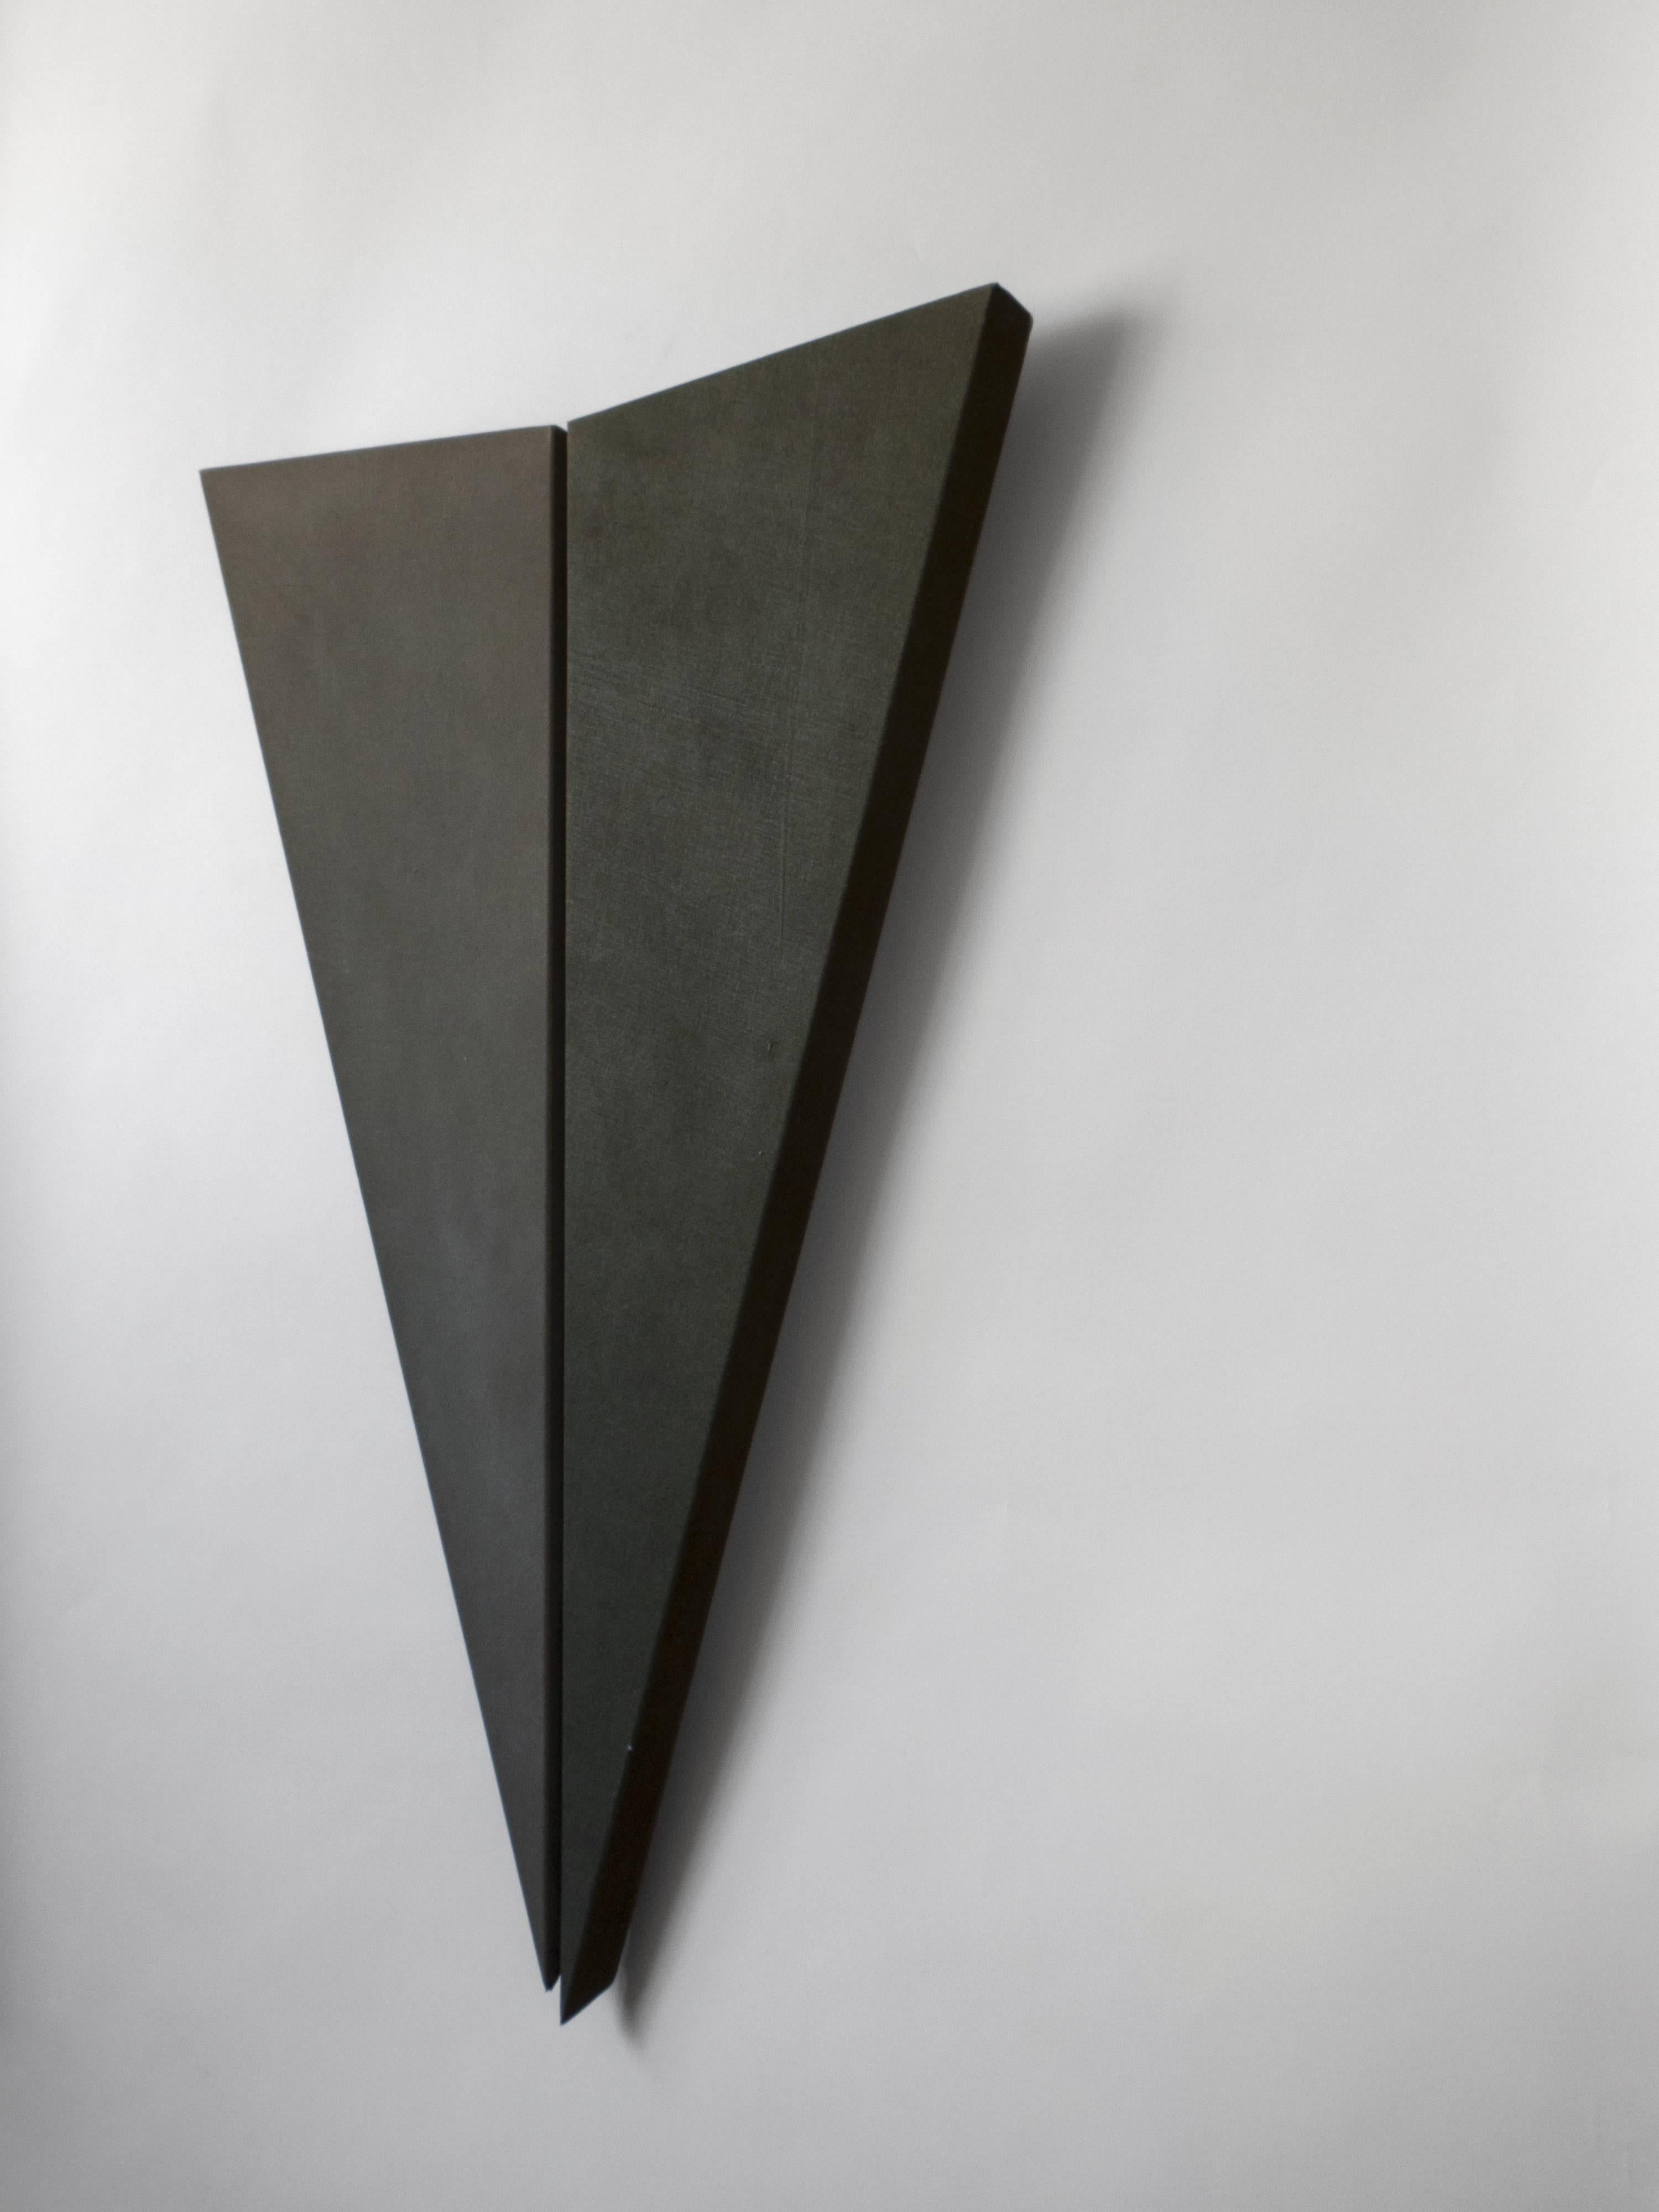 Two toned grey pigment on canvas, stretched over a geometric frame, vertically bisected. Signed on the reverse: Carl Magnus -83.